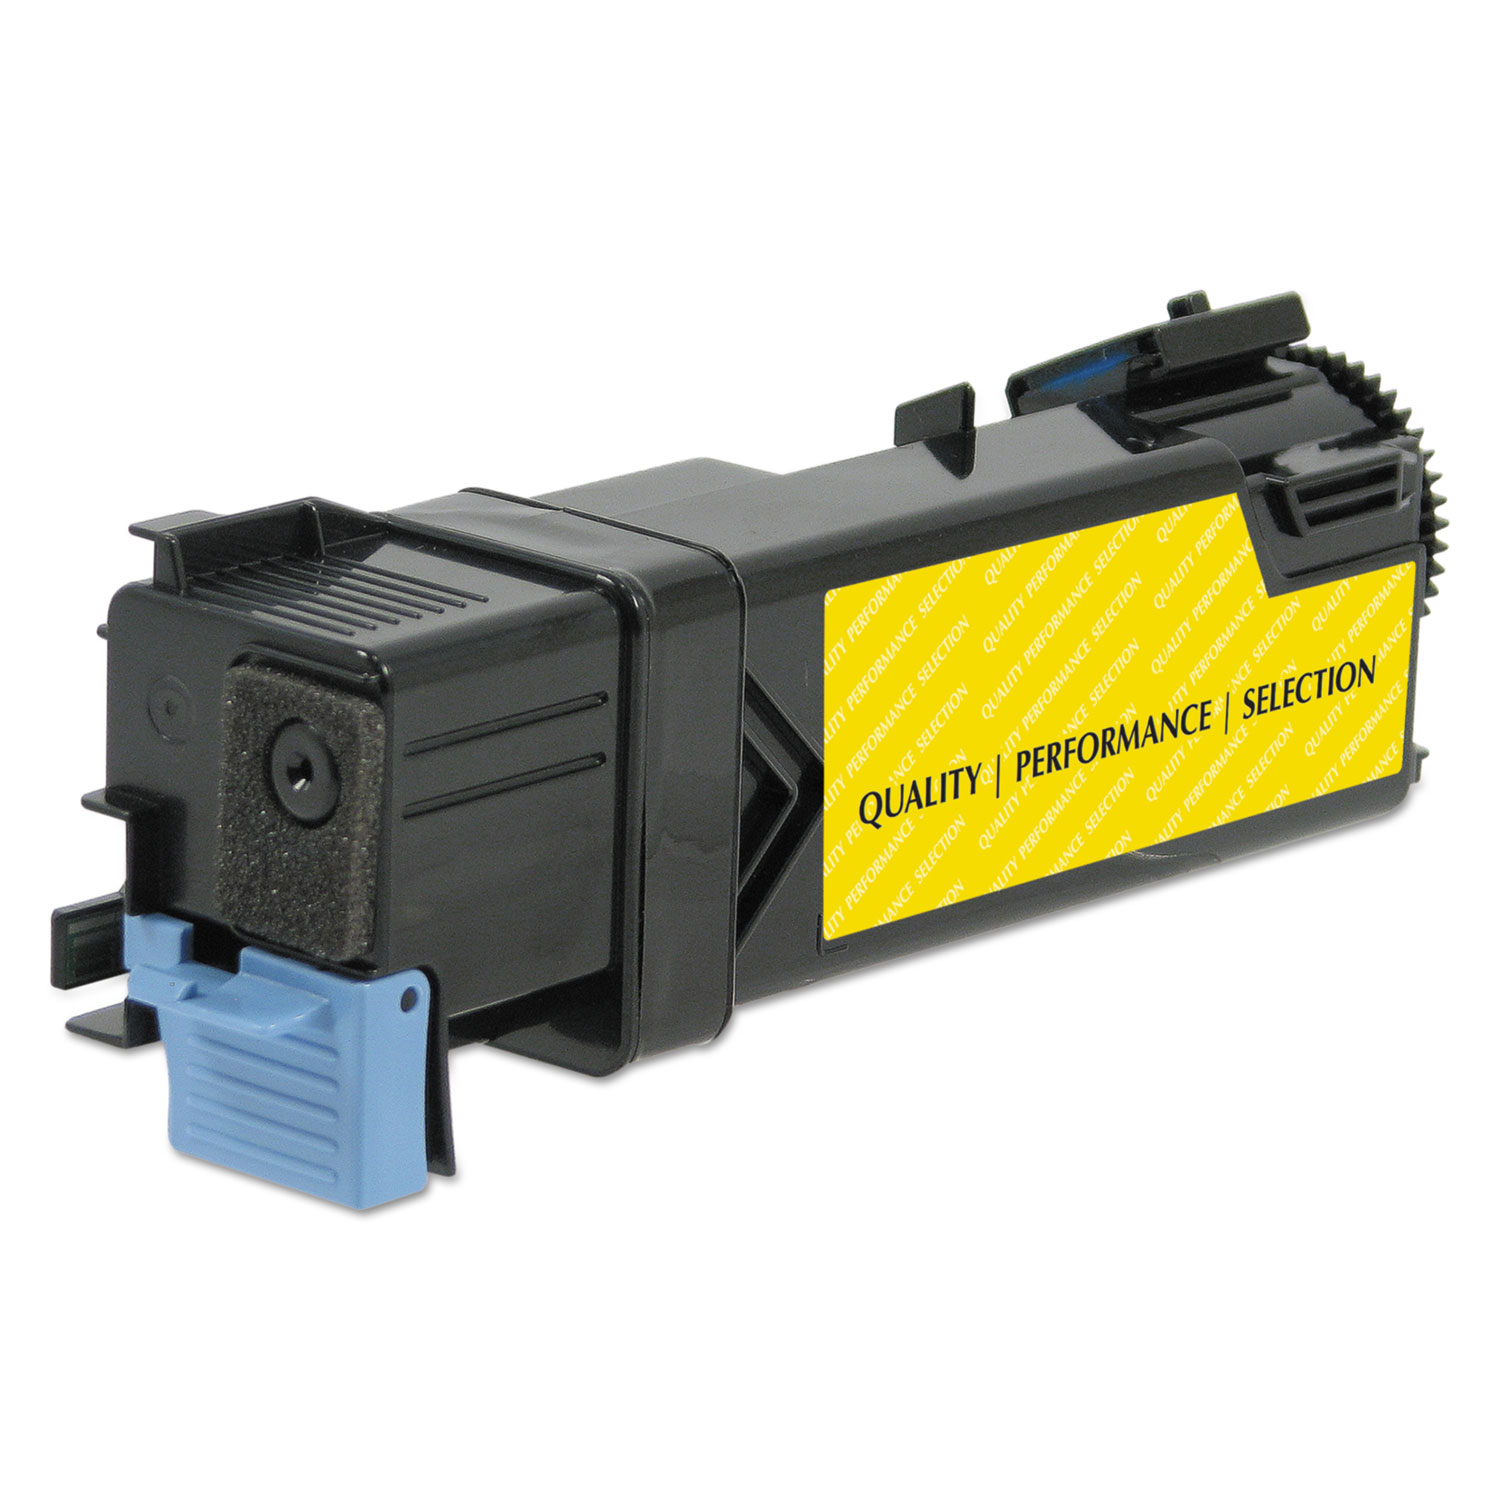 Remanufactured 331-0718 (2150) High-Yield Toner, Yellow